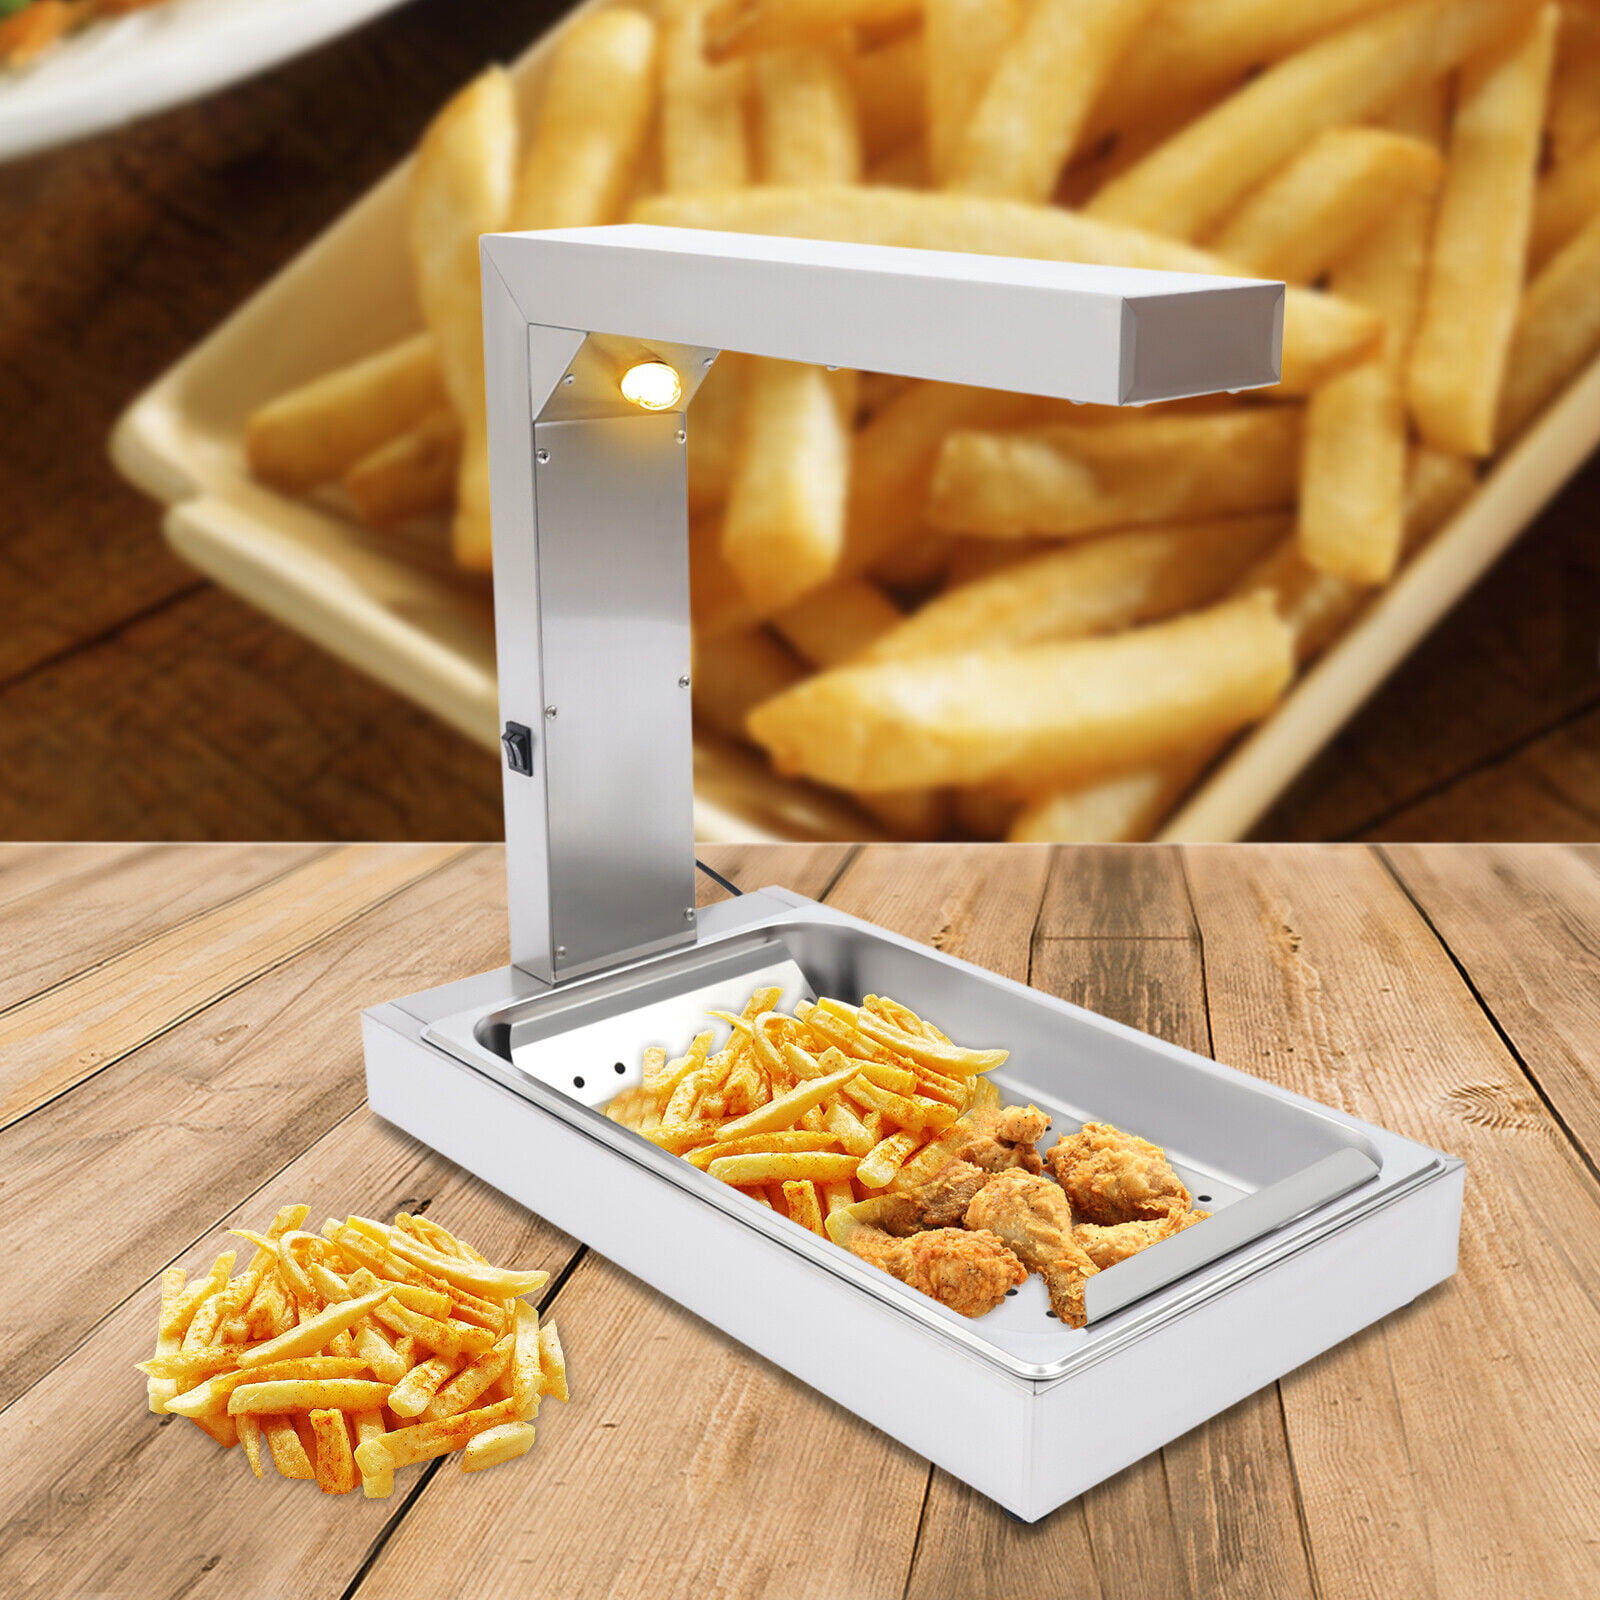 🍟 French Fries (Chips) With Stephanie! - Vevor Machine - Not Wood Turning  